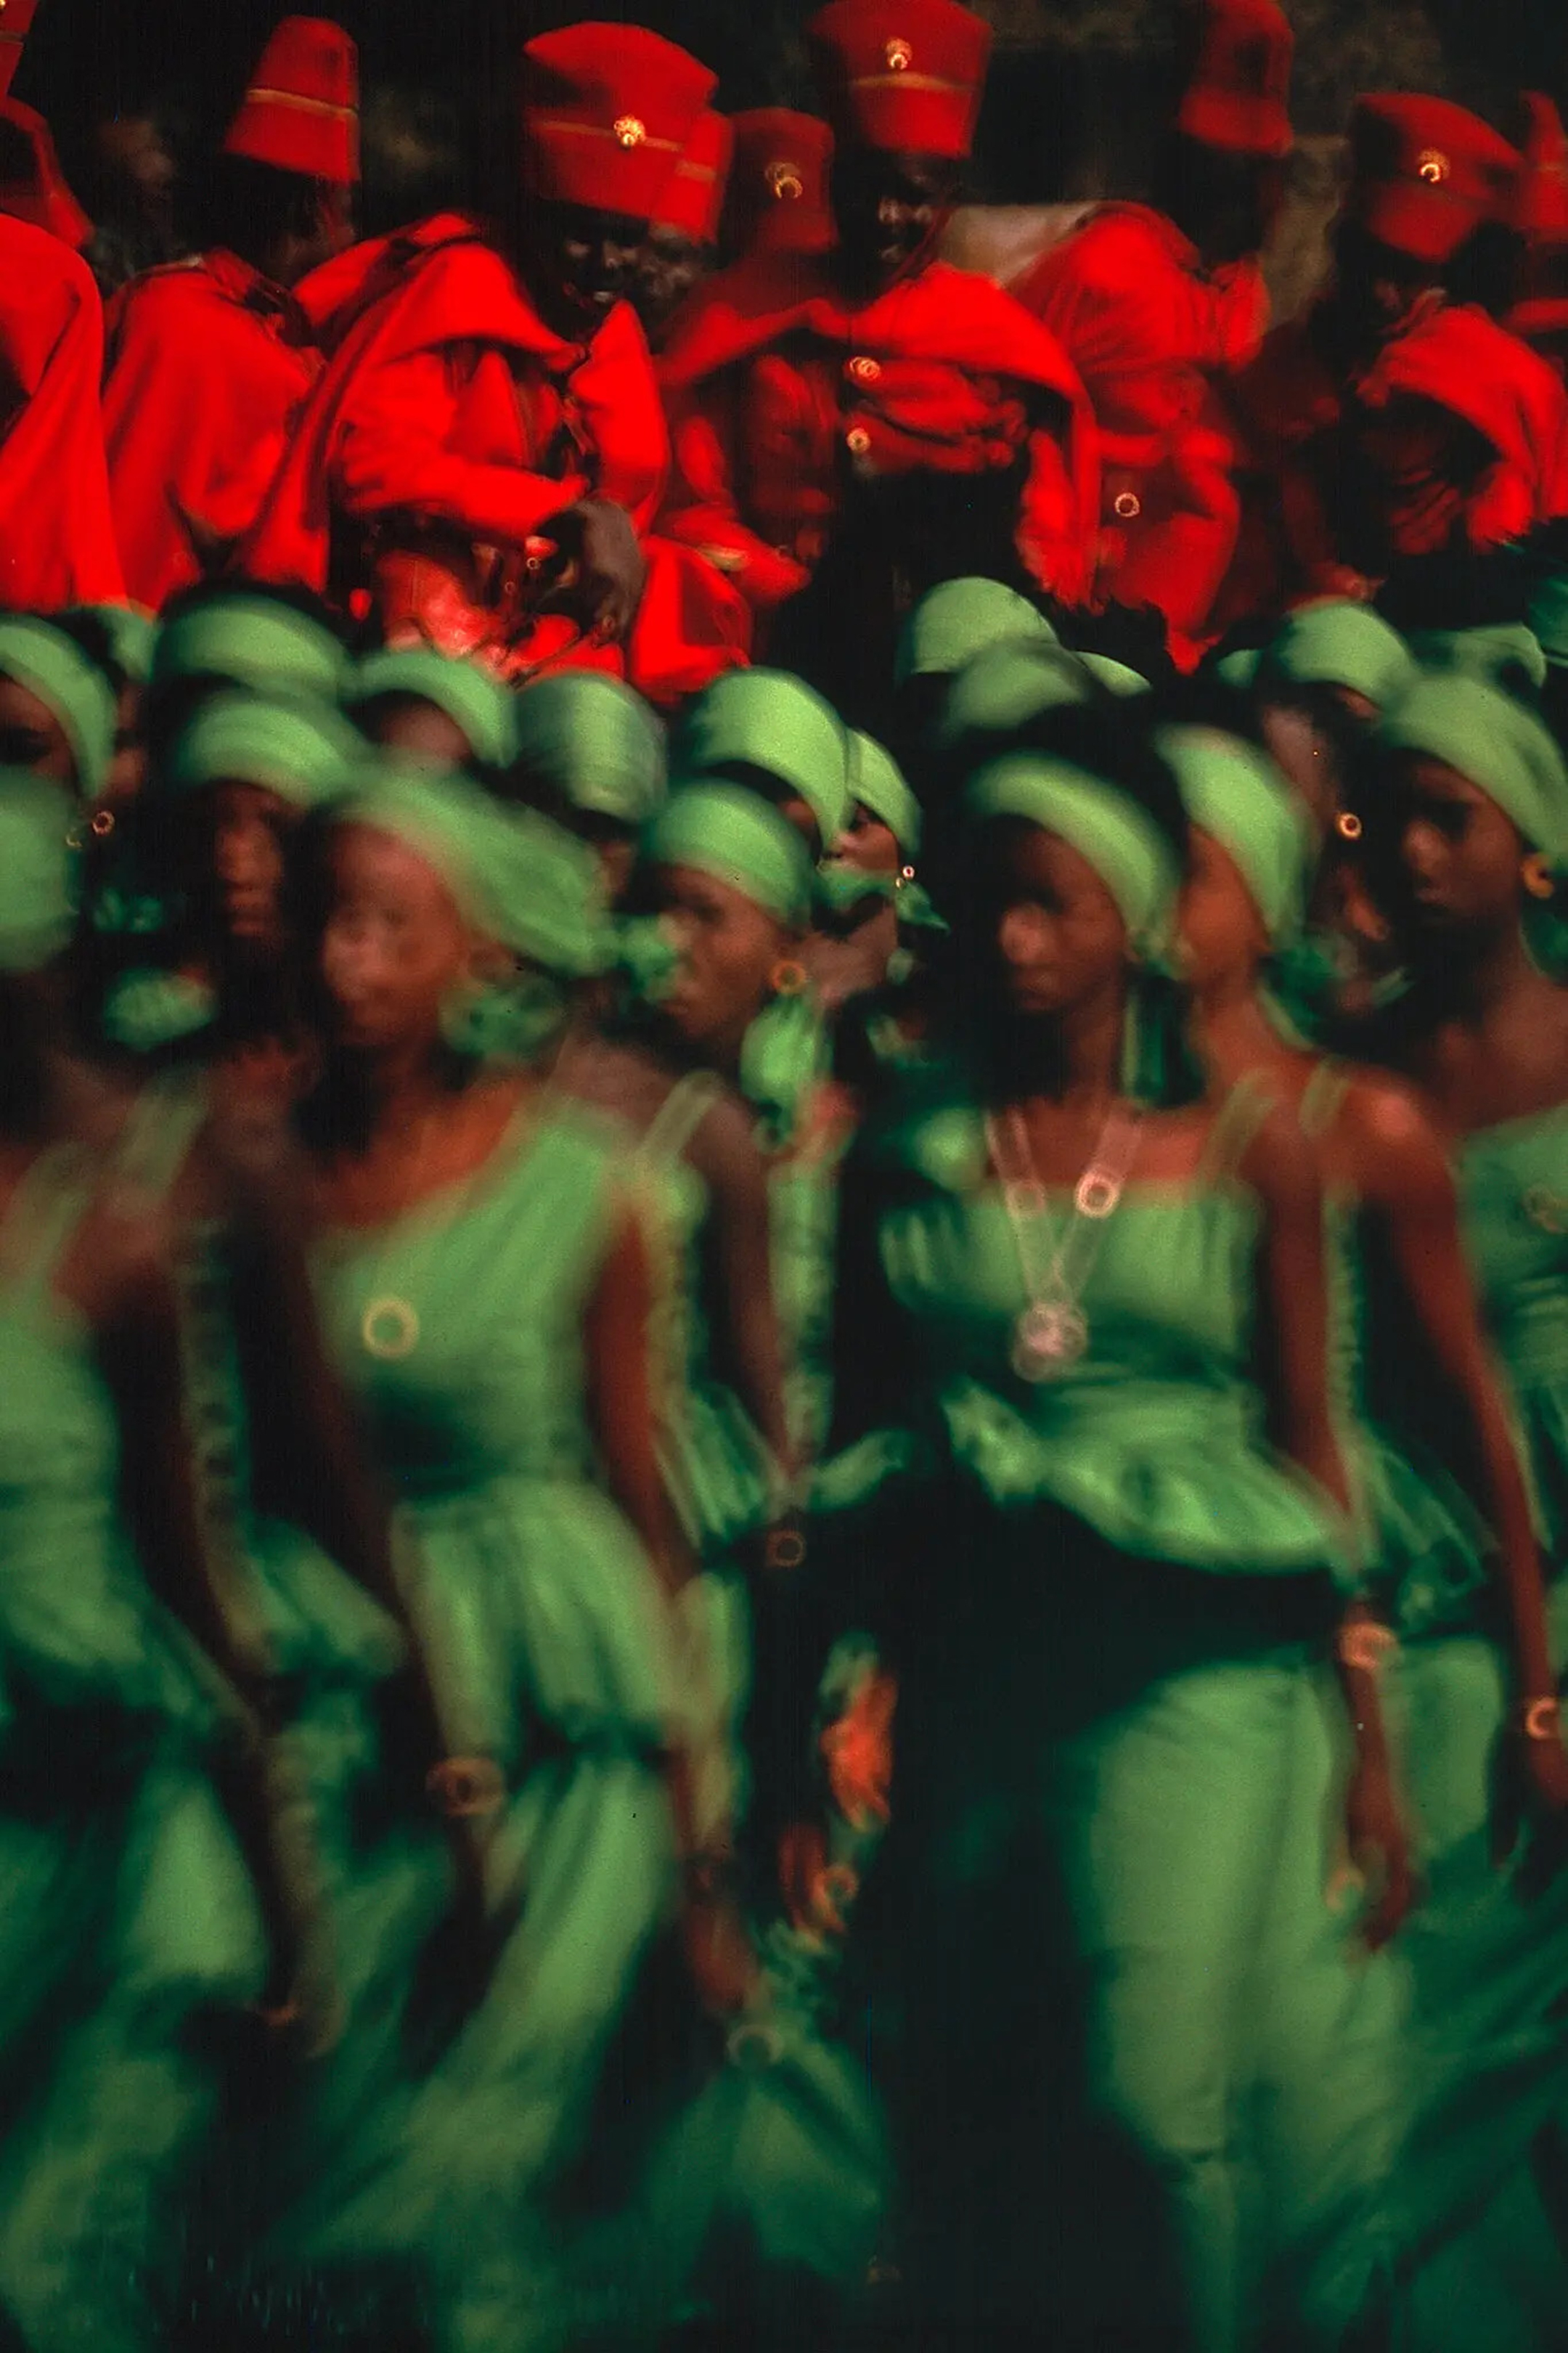 Photo of women in green dresses in the foreground and men in red uniforms in the background